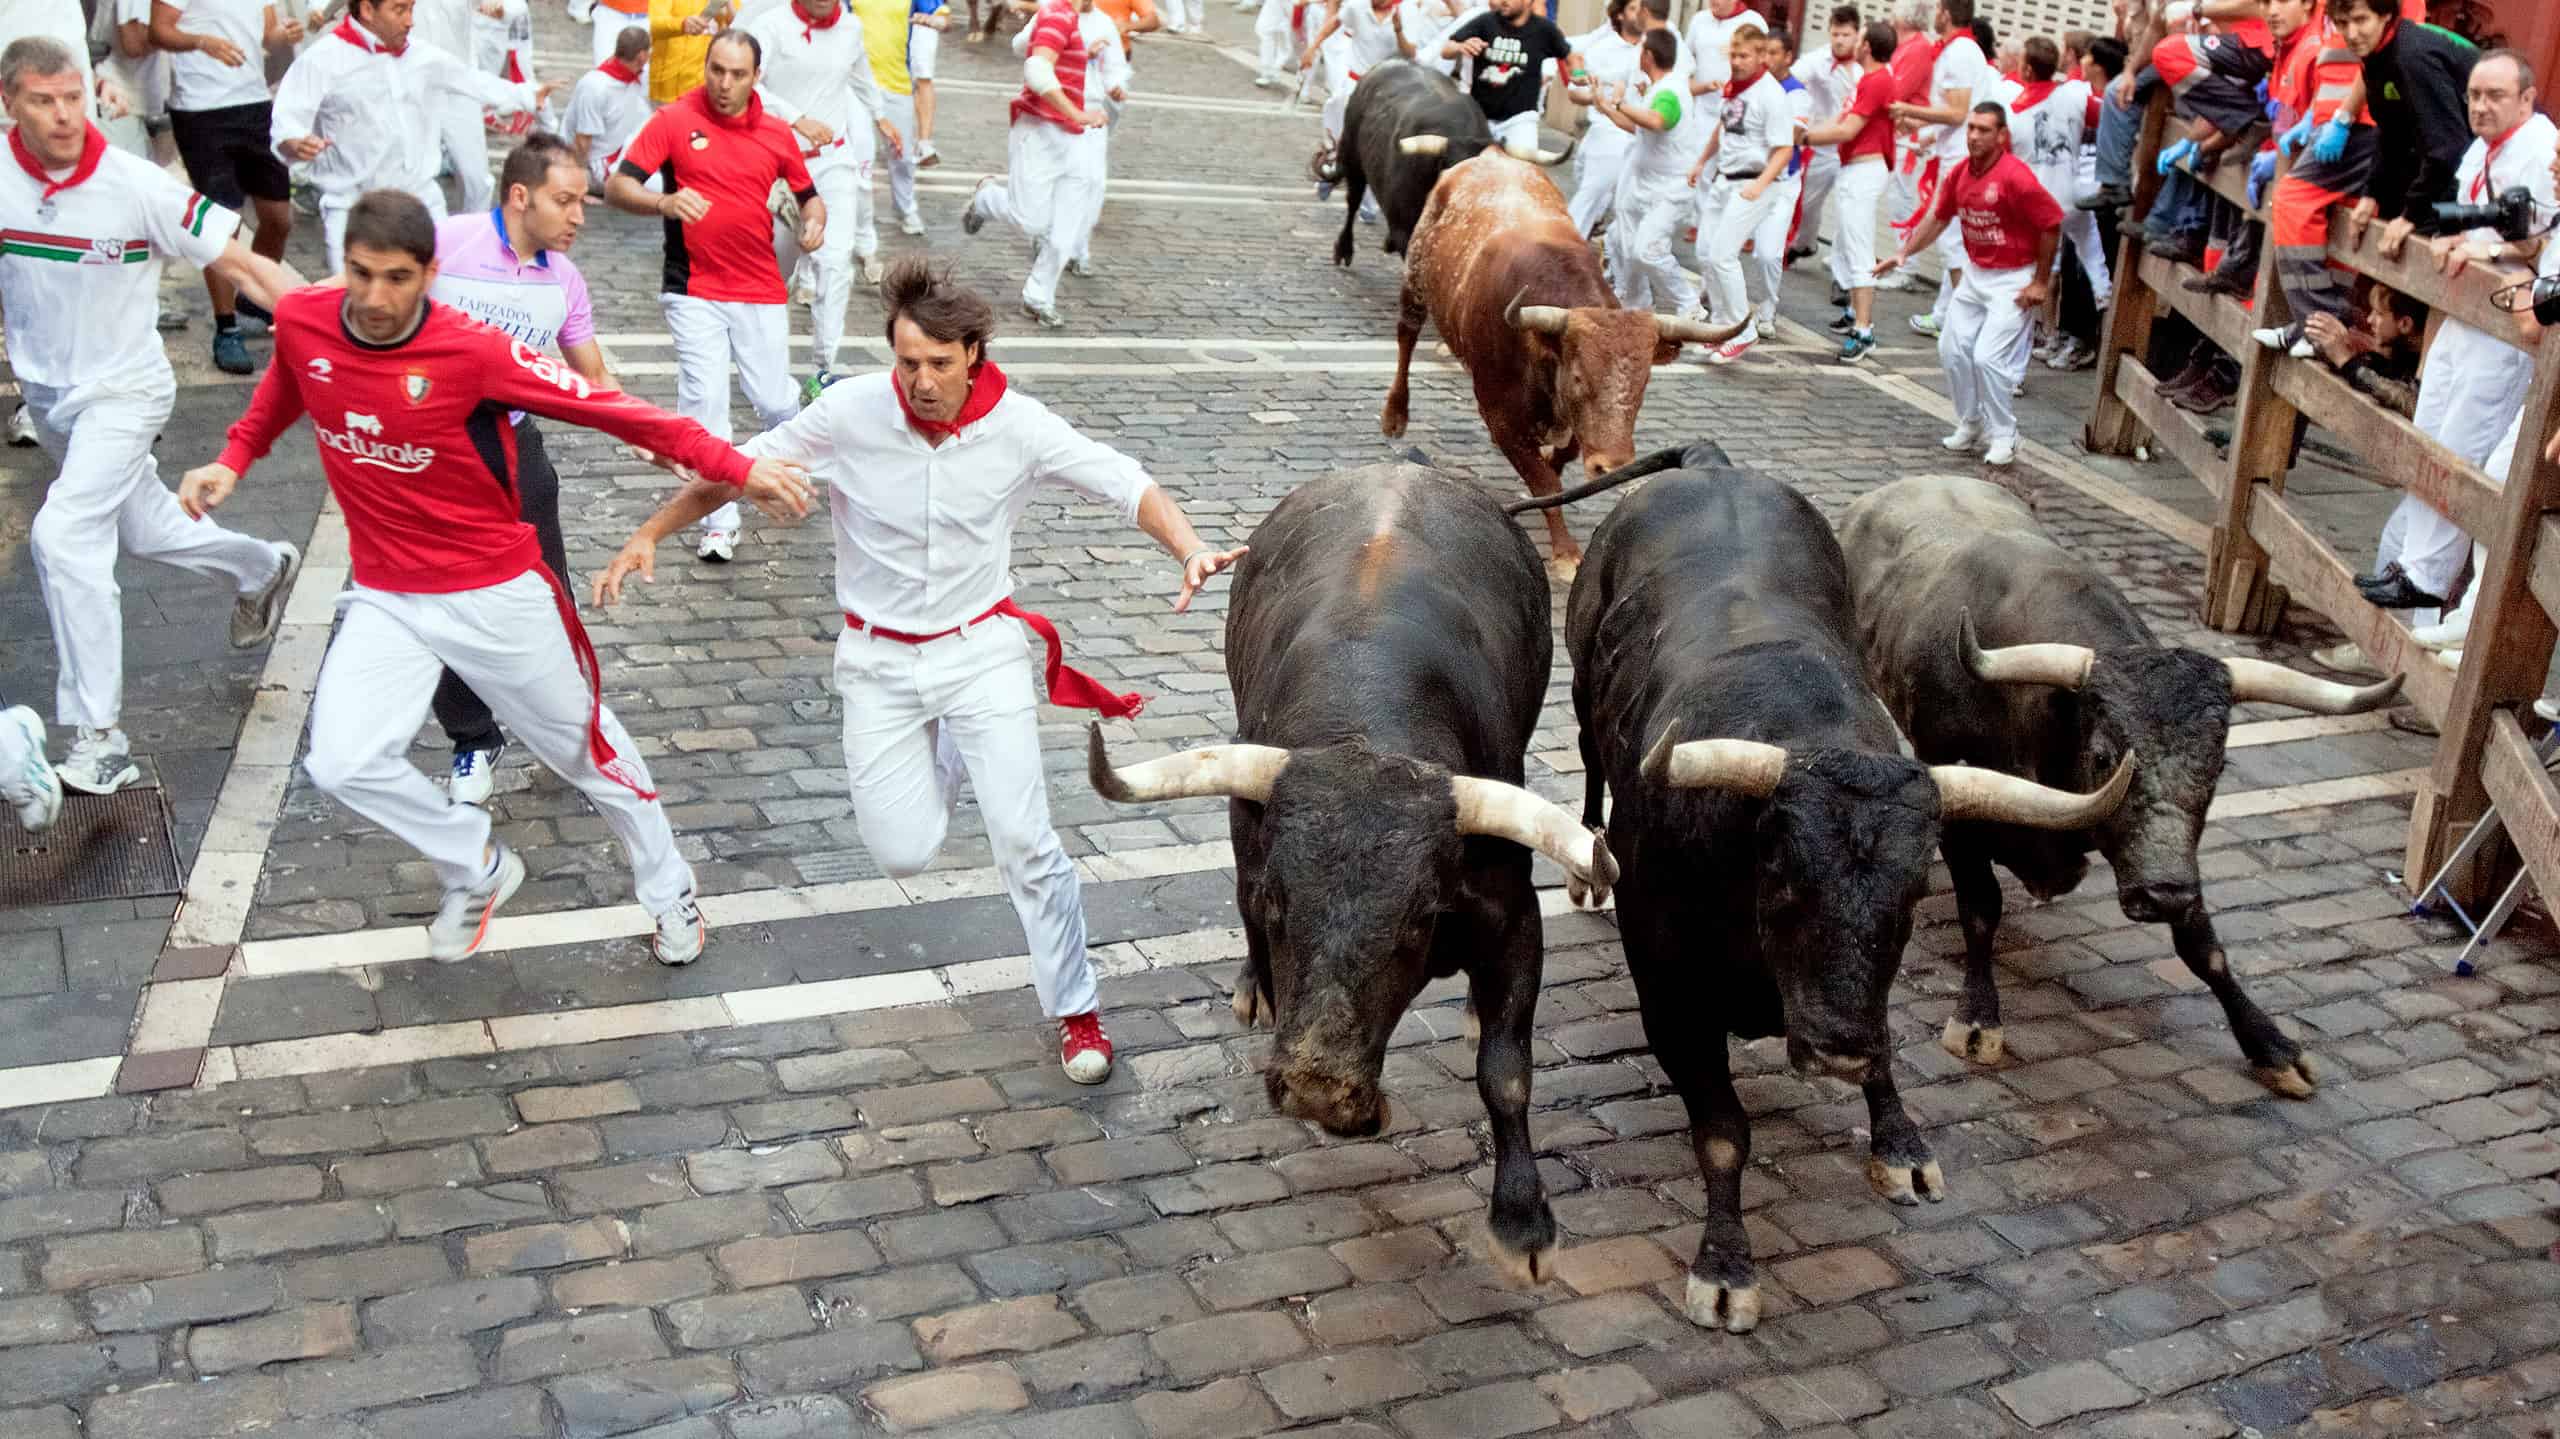 Spain's Famous 'Running of the Bulls' Starts This Week: Just How ...